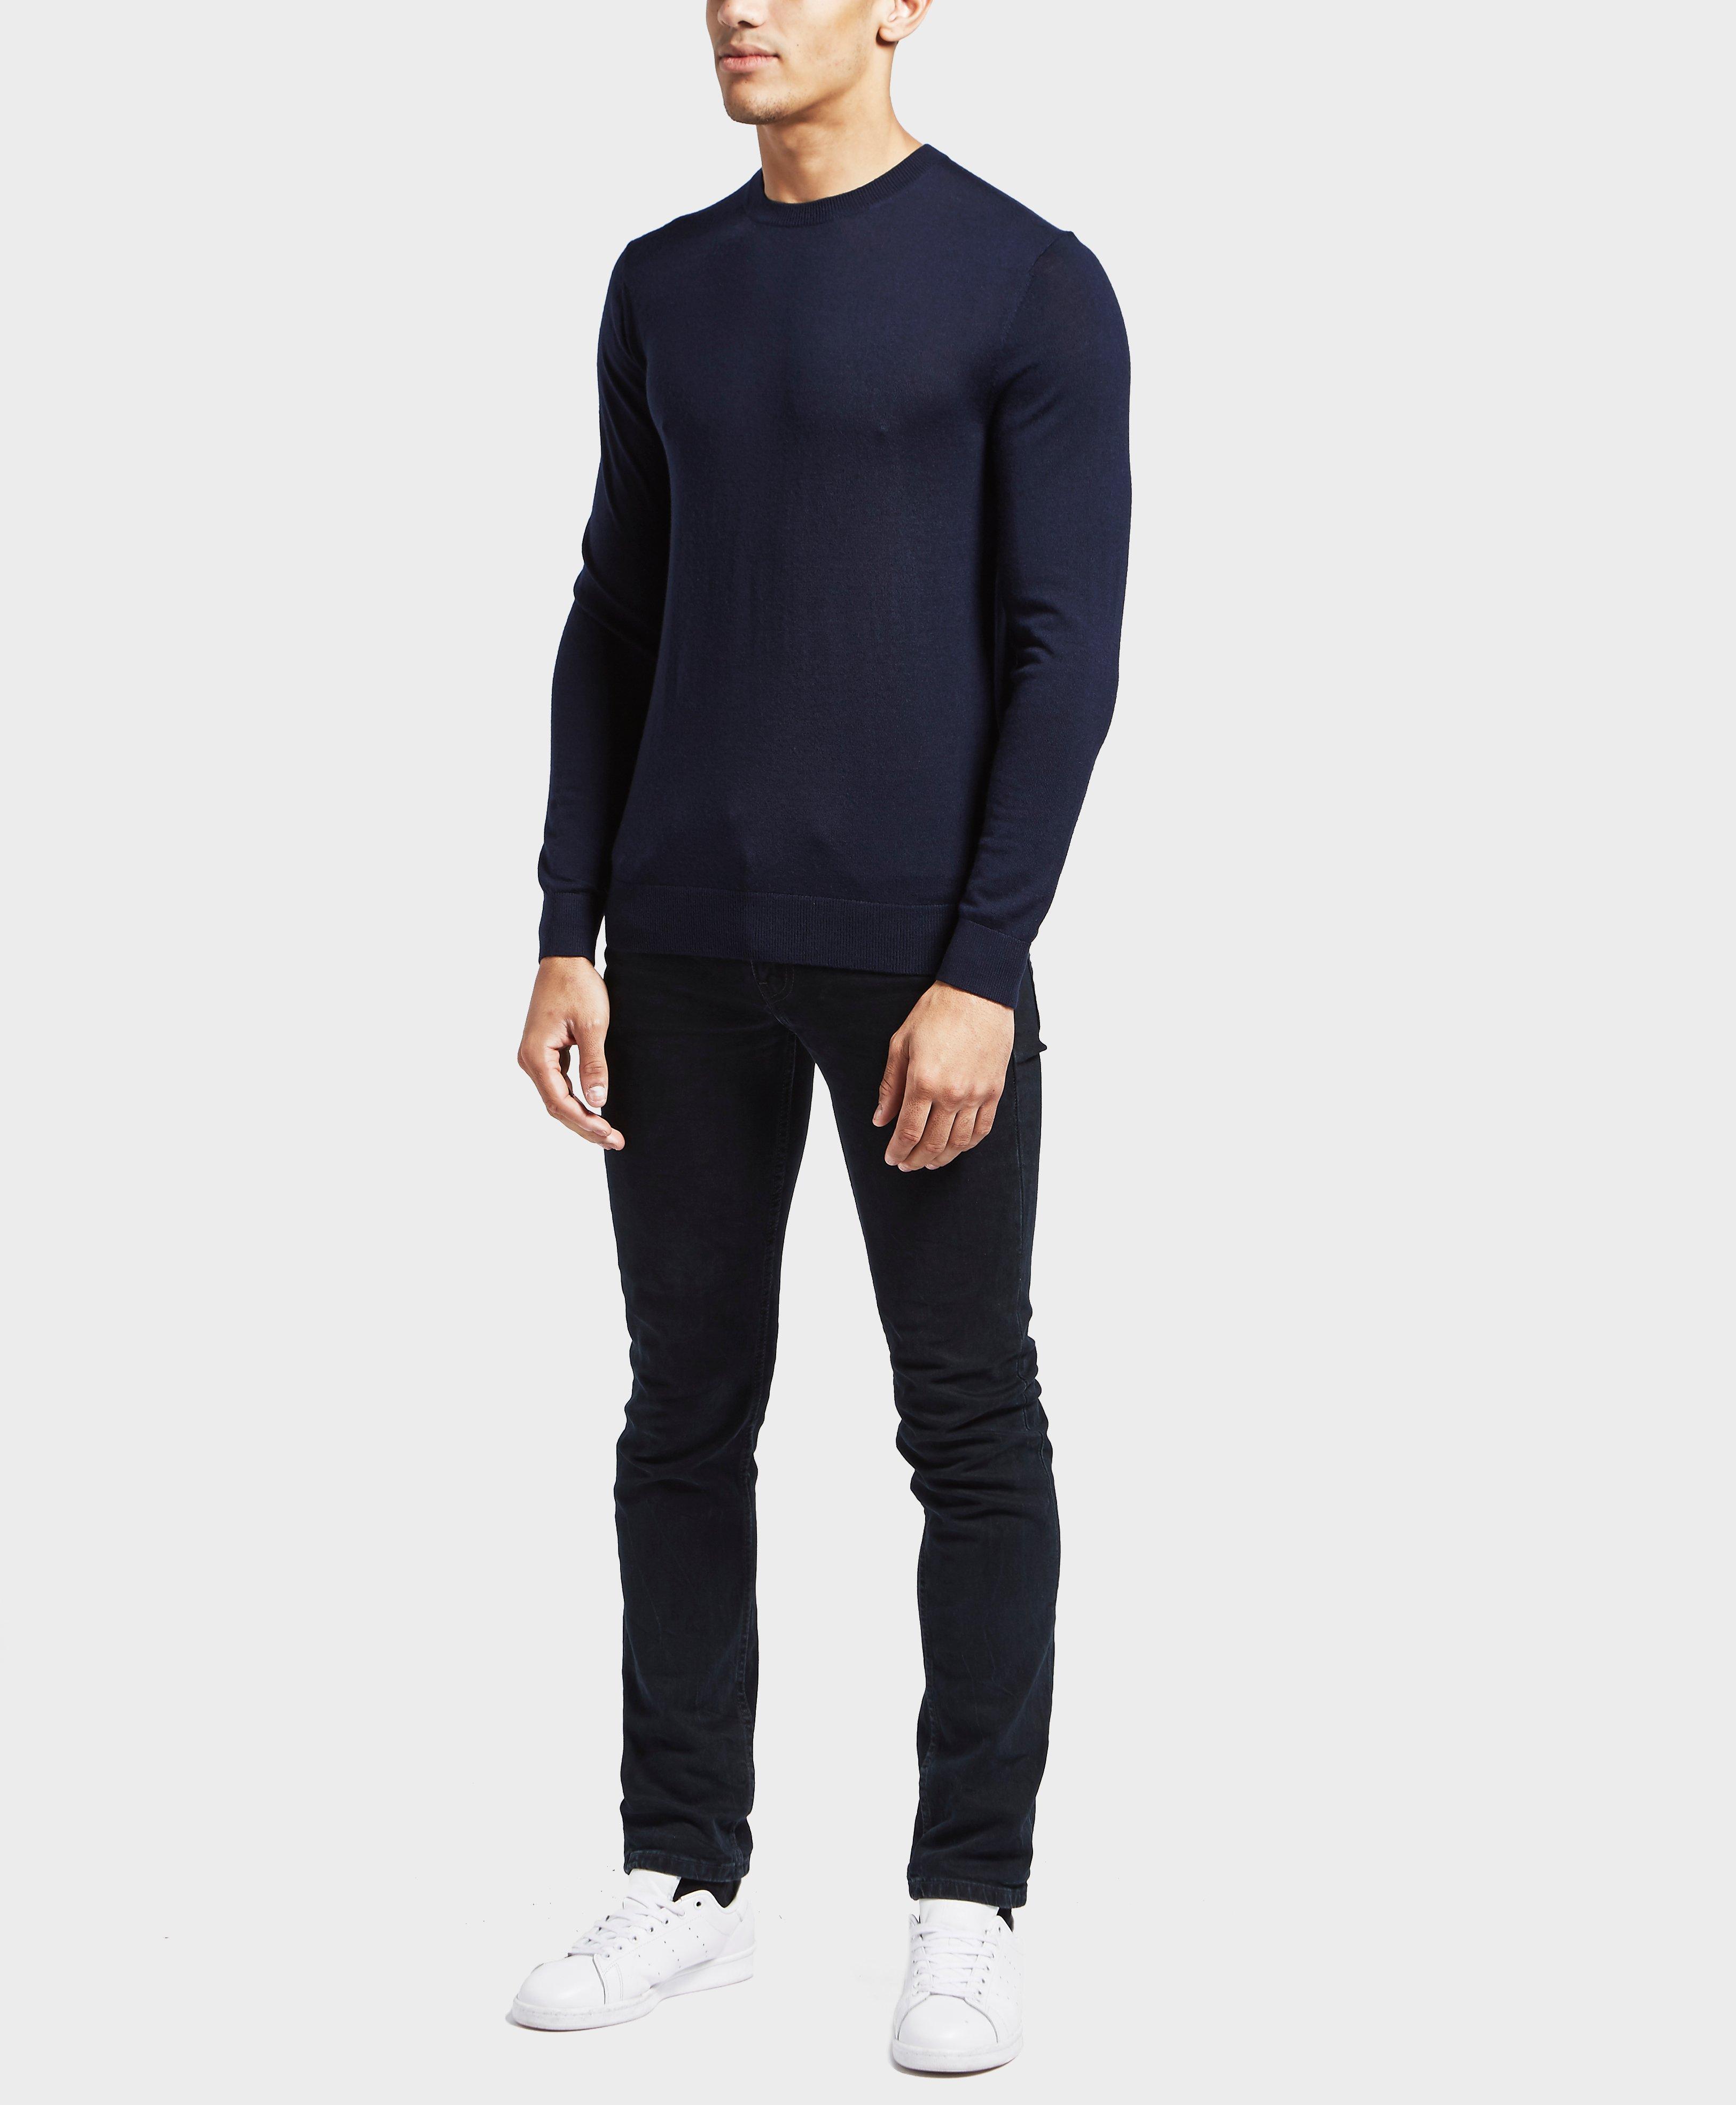 Lyst - Aquascutum Carston Knitted Jumper in Blue for Men